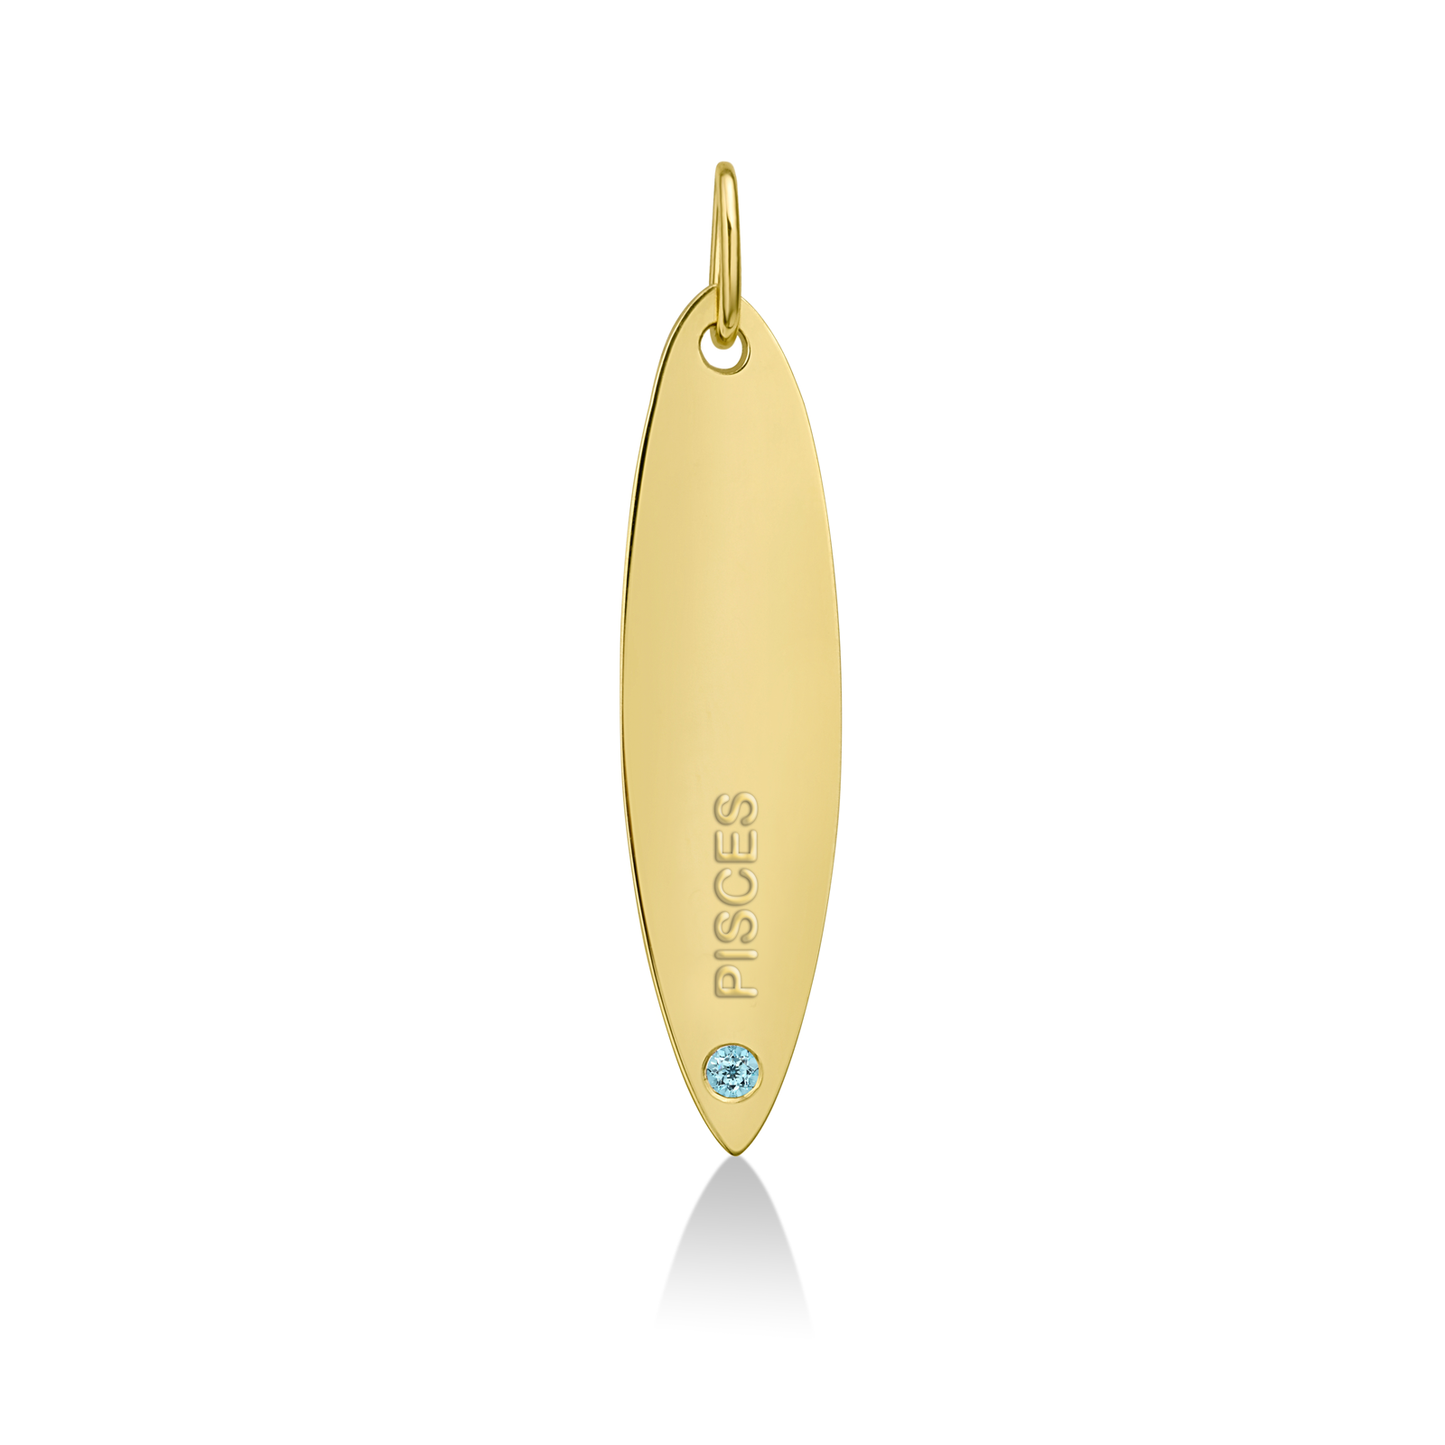 14k gold surfboard charm lock with PISCES engraved and aquamarine